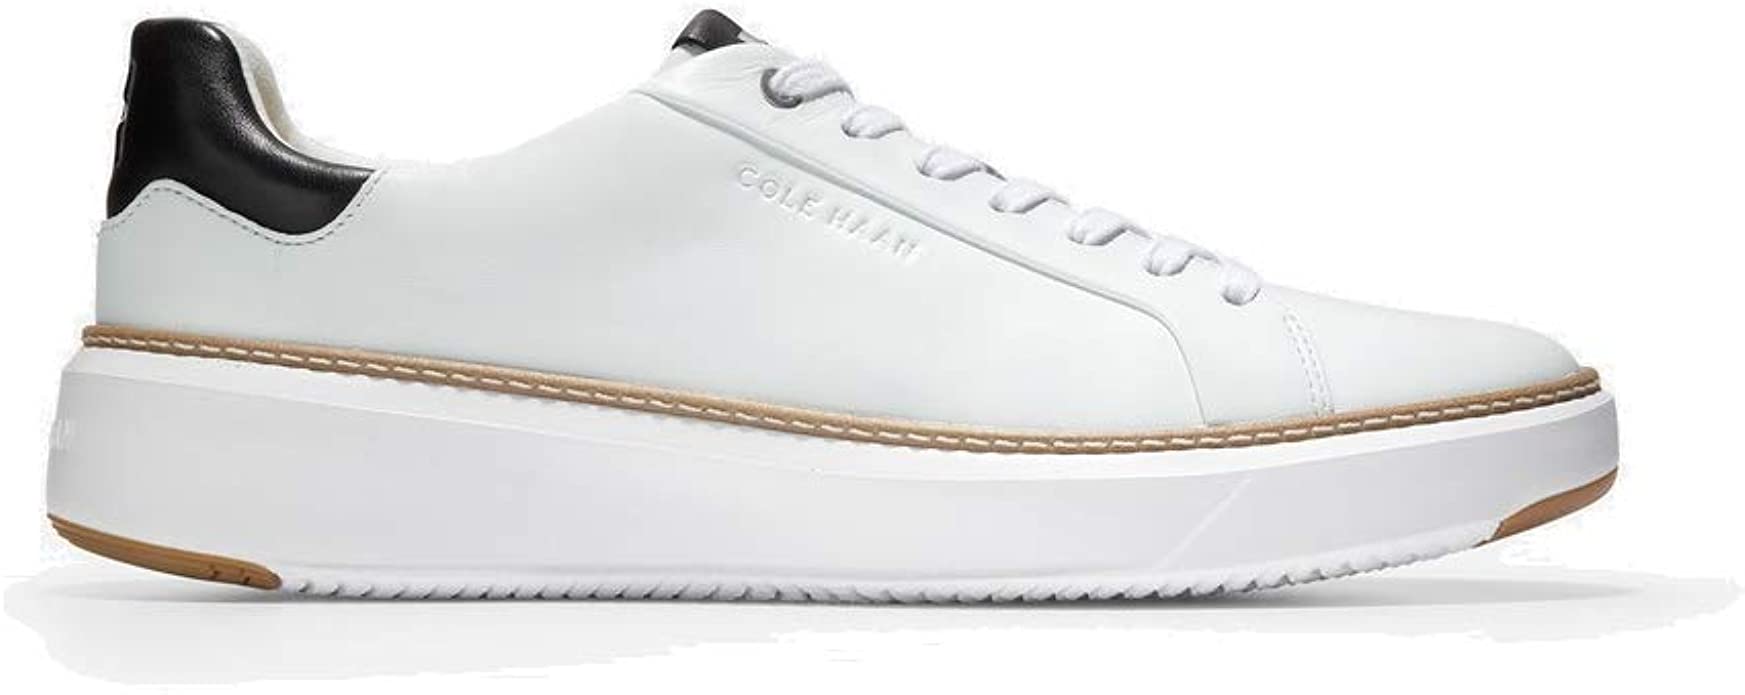 Cole Haan Mens Optic White Size 9.5 Grandpro TopSpin Sneakers